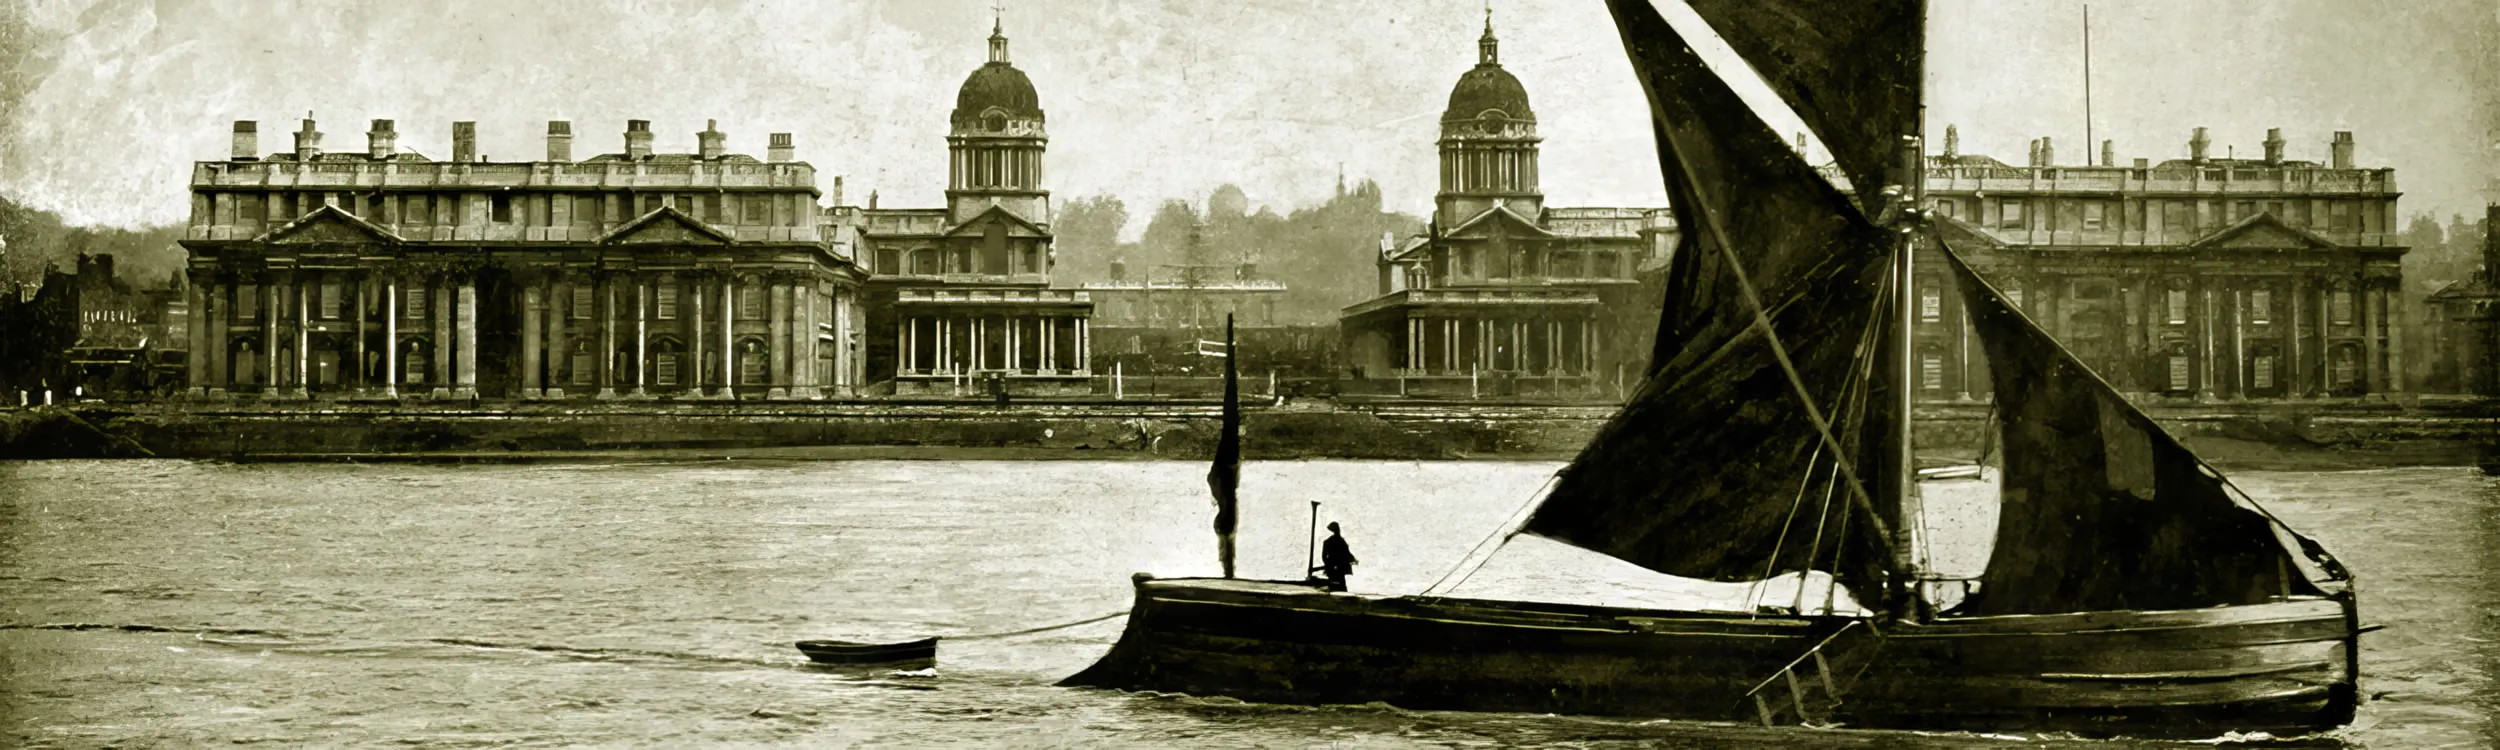 Greenwich property records reveal the lost past